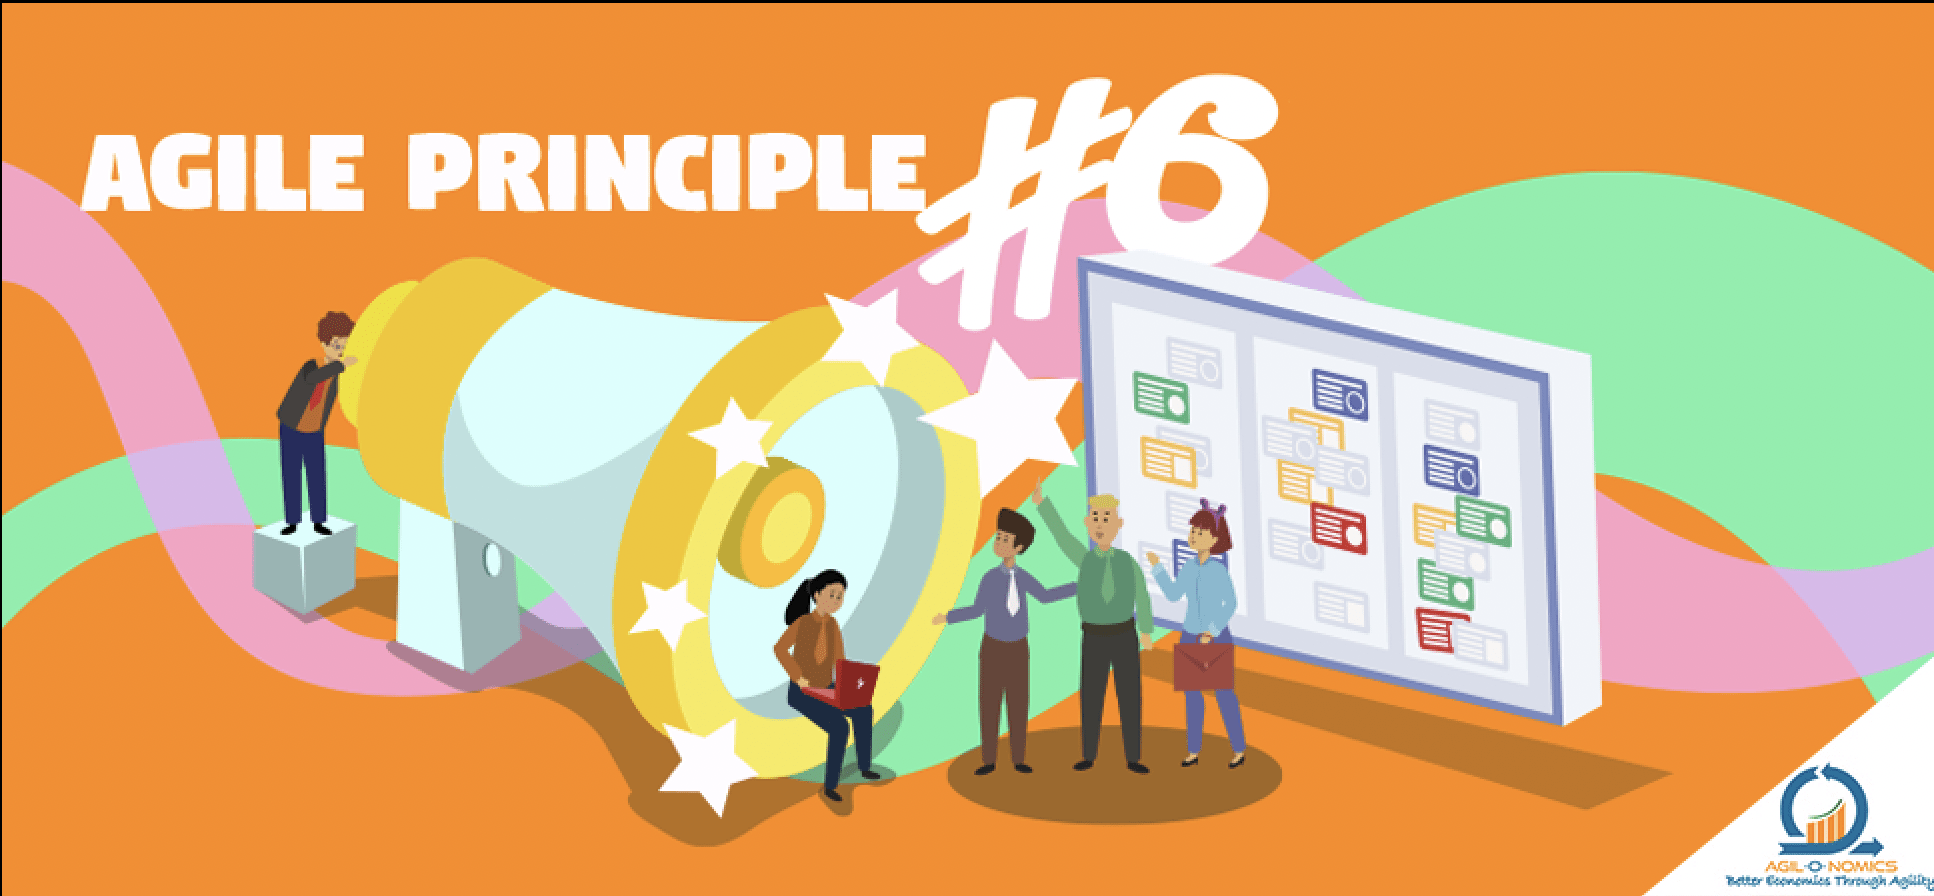 Agile Principle 6: The most efficient and effective communication by face-to-face